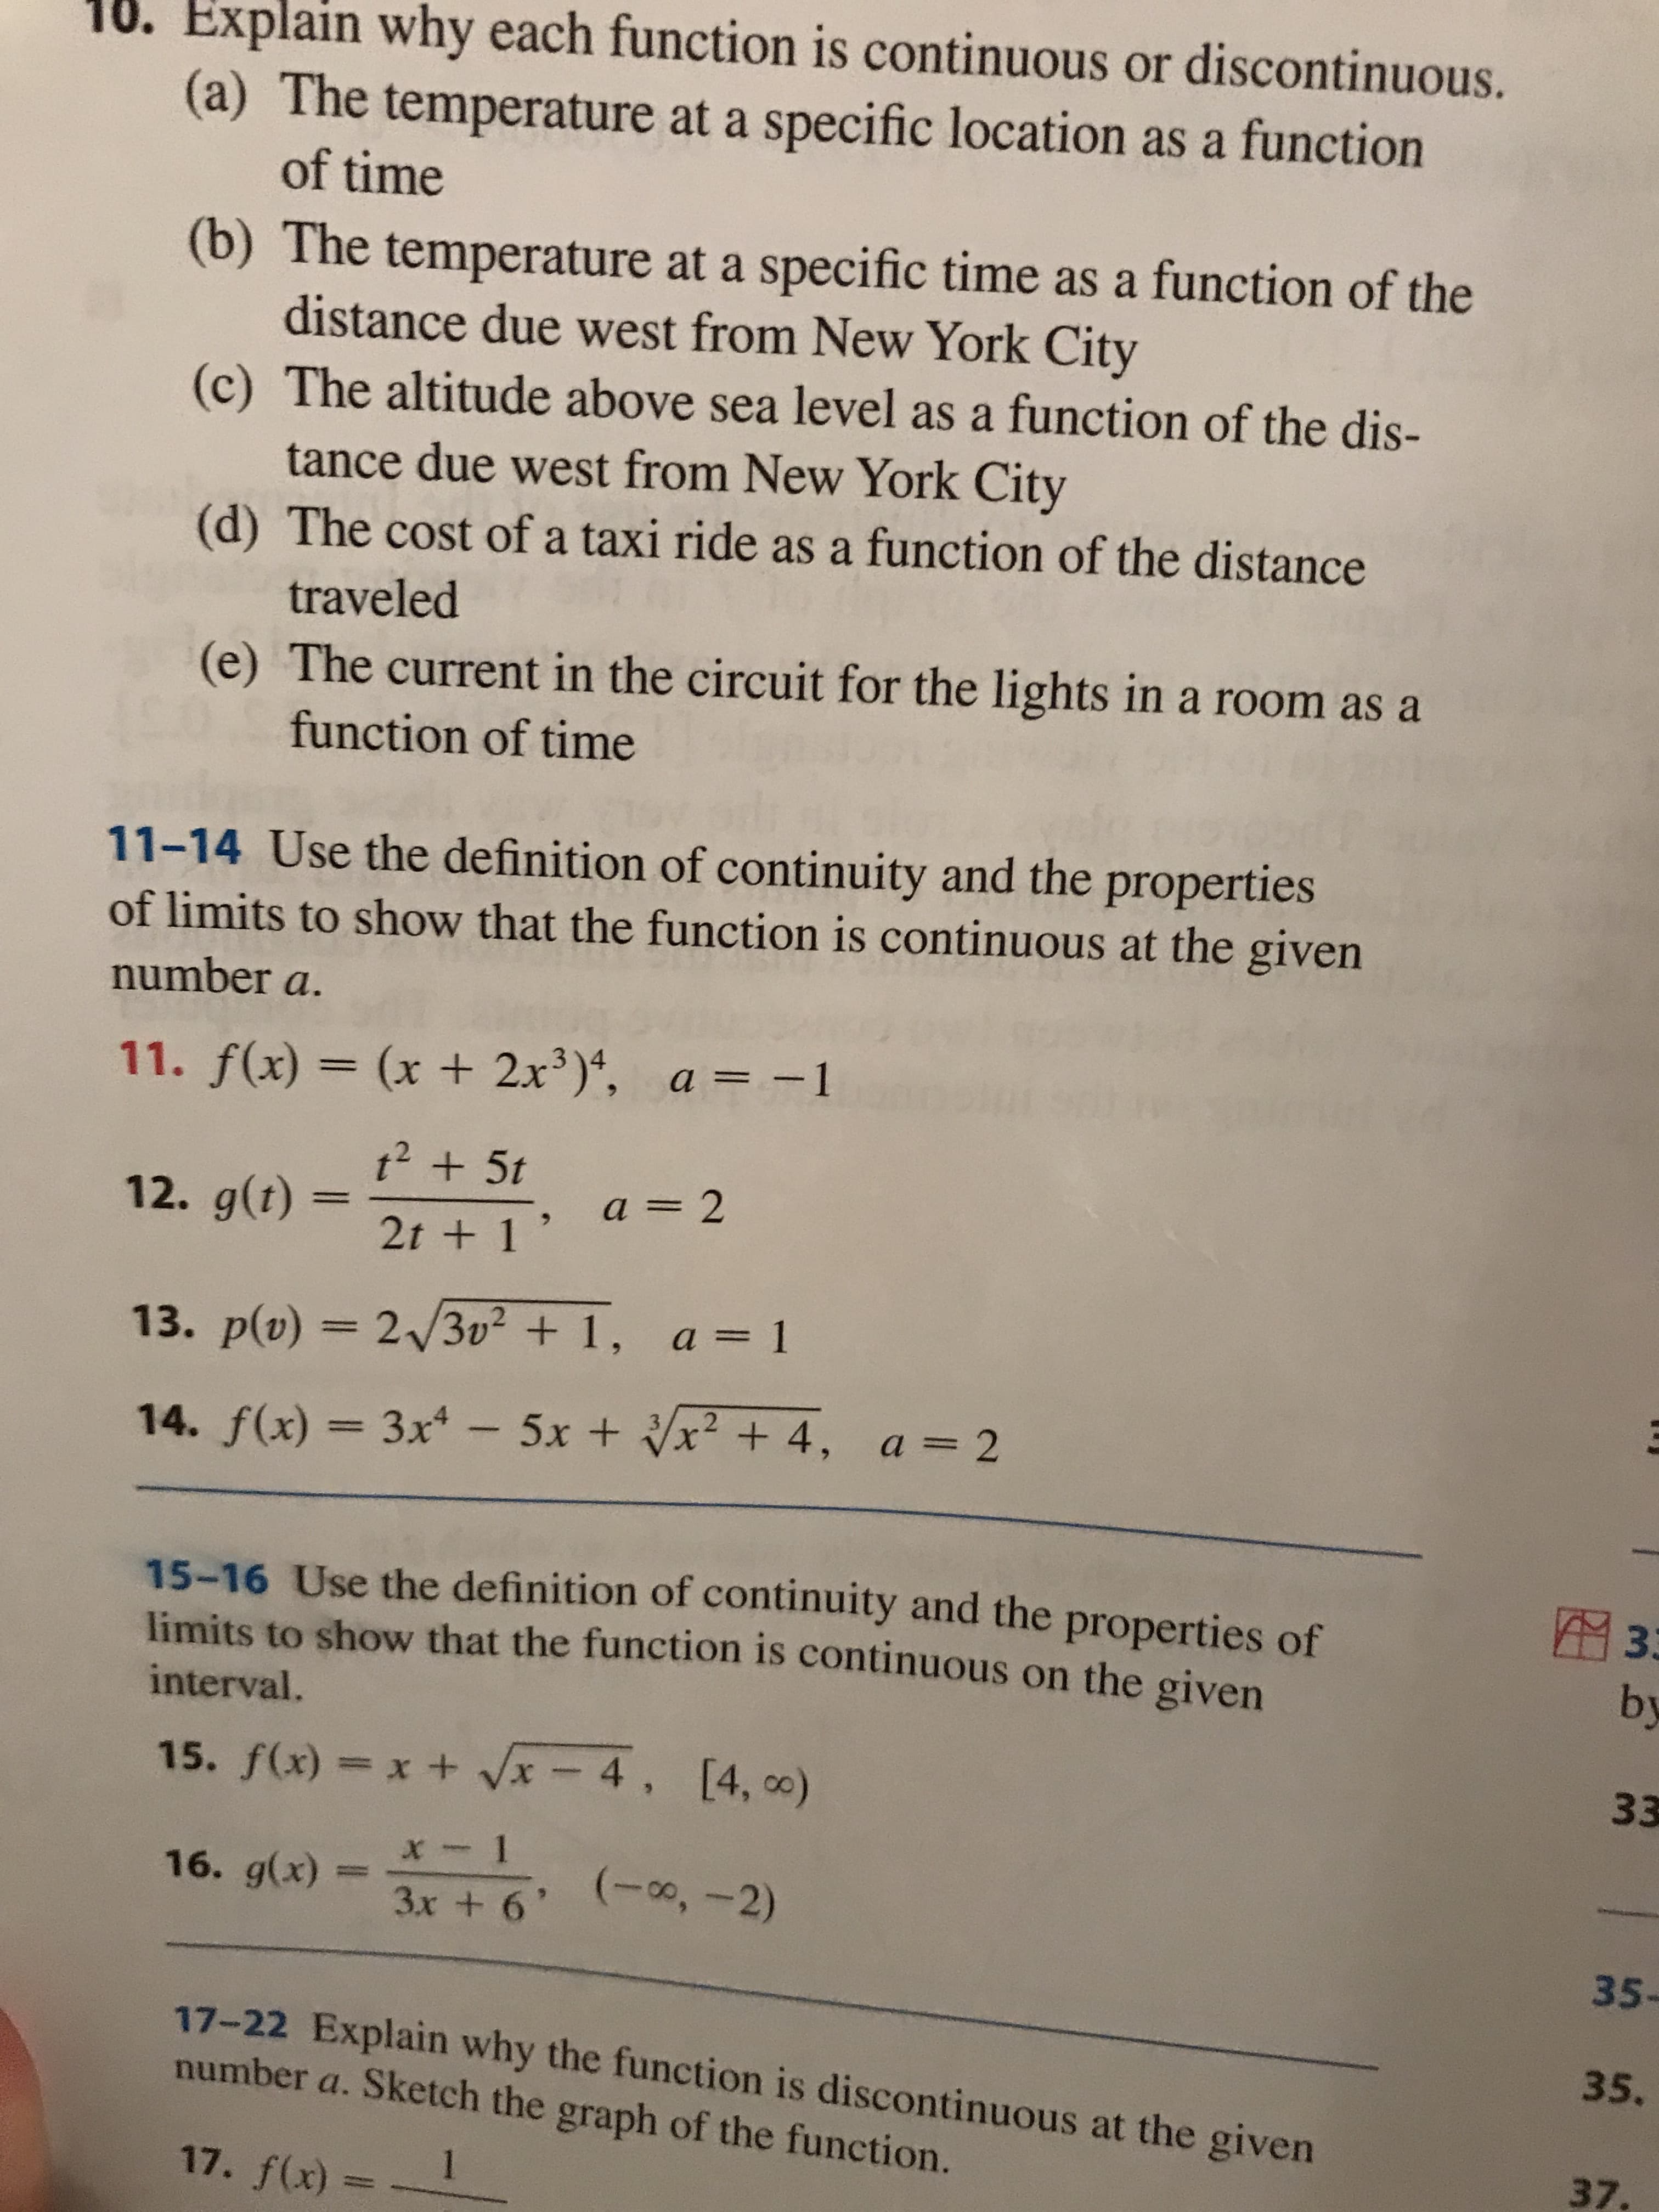 10. Explain why each function is continuous or discontinuous.
(a) The temperature at a specific location as a function
of time
(b) The temperature at a specific time as a function of the
distance due west from New York City
(c) The altitude above sea level as a function of the dis-
tance due west from New York City
(d) The cost of a taxi ride as a function of the distance
traveled
(e) The current in the circuit for the lights in a room as a
function of time
11-14 Use the definition of continuity and the properties
of limits to show that the function is continuous at the given
number a.
11. f(x) = (x + 2x)*, a = -1
t2 + 5t
a = 2
12. g(t)
2t + 1'
13. p(v) = 23v² + 1, a = 1
A3D2
14. f(x) = 3x* -5x + x² + 4, a = 2
%3D
15-16 Use the definition of continuity and the properties of
limits to show that the function is continuous on the given
33
by
interval.
33
15. f(x) = x + Vx - 4, [4, o)
16. g(x)
(-00,-2)
3x + 6'
35-
17-22 Explain why the function is discontinuous at the given
number a. Sketch the graph of the function.
35,
37.
1
17. f(x) :
